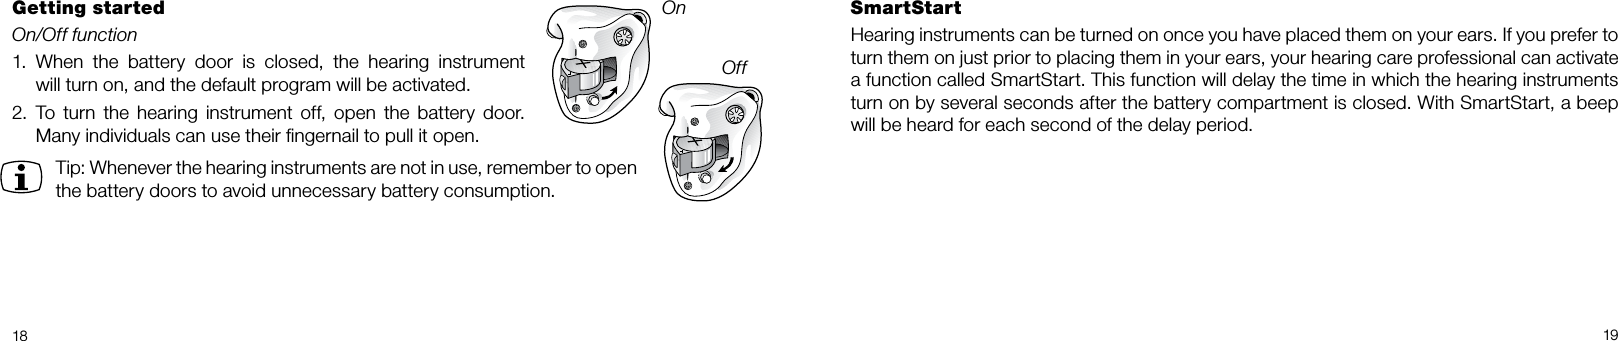 18 19SmartStartHearing instruments can be turned on once you have placed them on your ears. If you prefer to turn them on just prior to placing them in your ears, your hearing care professional can activate a function called SmartStart. This function will delay the time in which the hearing instruments turn on by several seconds after the battery compartment is closed. With SmartStart, a beep will be heard for each second of the delay period.Getting startedOn/Off function1.  When the battery door is closed, the hearing instrument  will turn on, and the default program will be activated. 2.  To turn the hearing instrument off, open the battery door. Many individuals can use their ﬁngernail to pull it open.Tip: Whenever the hearing instruments are not in use, remember to open the battery doors to avoid unnecessary battery consumption.OnOff